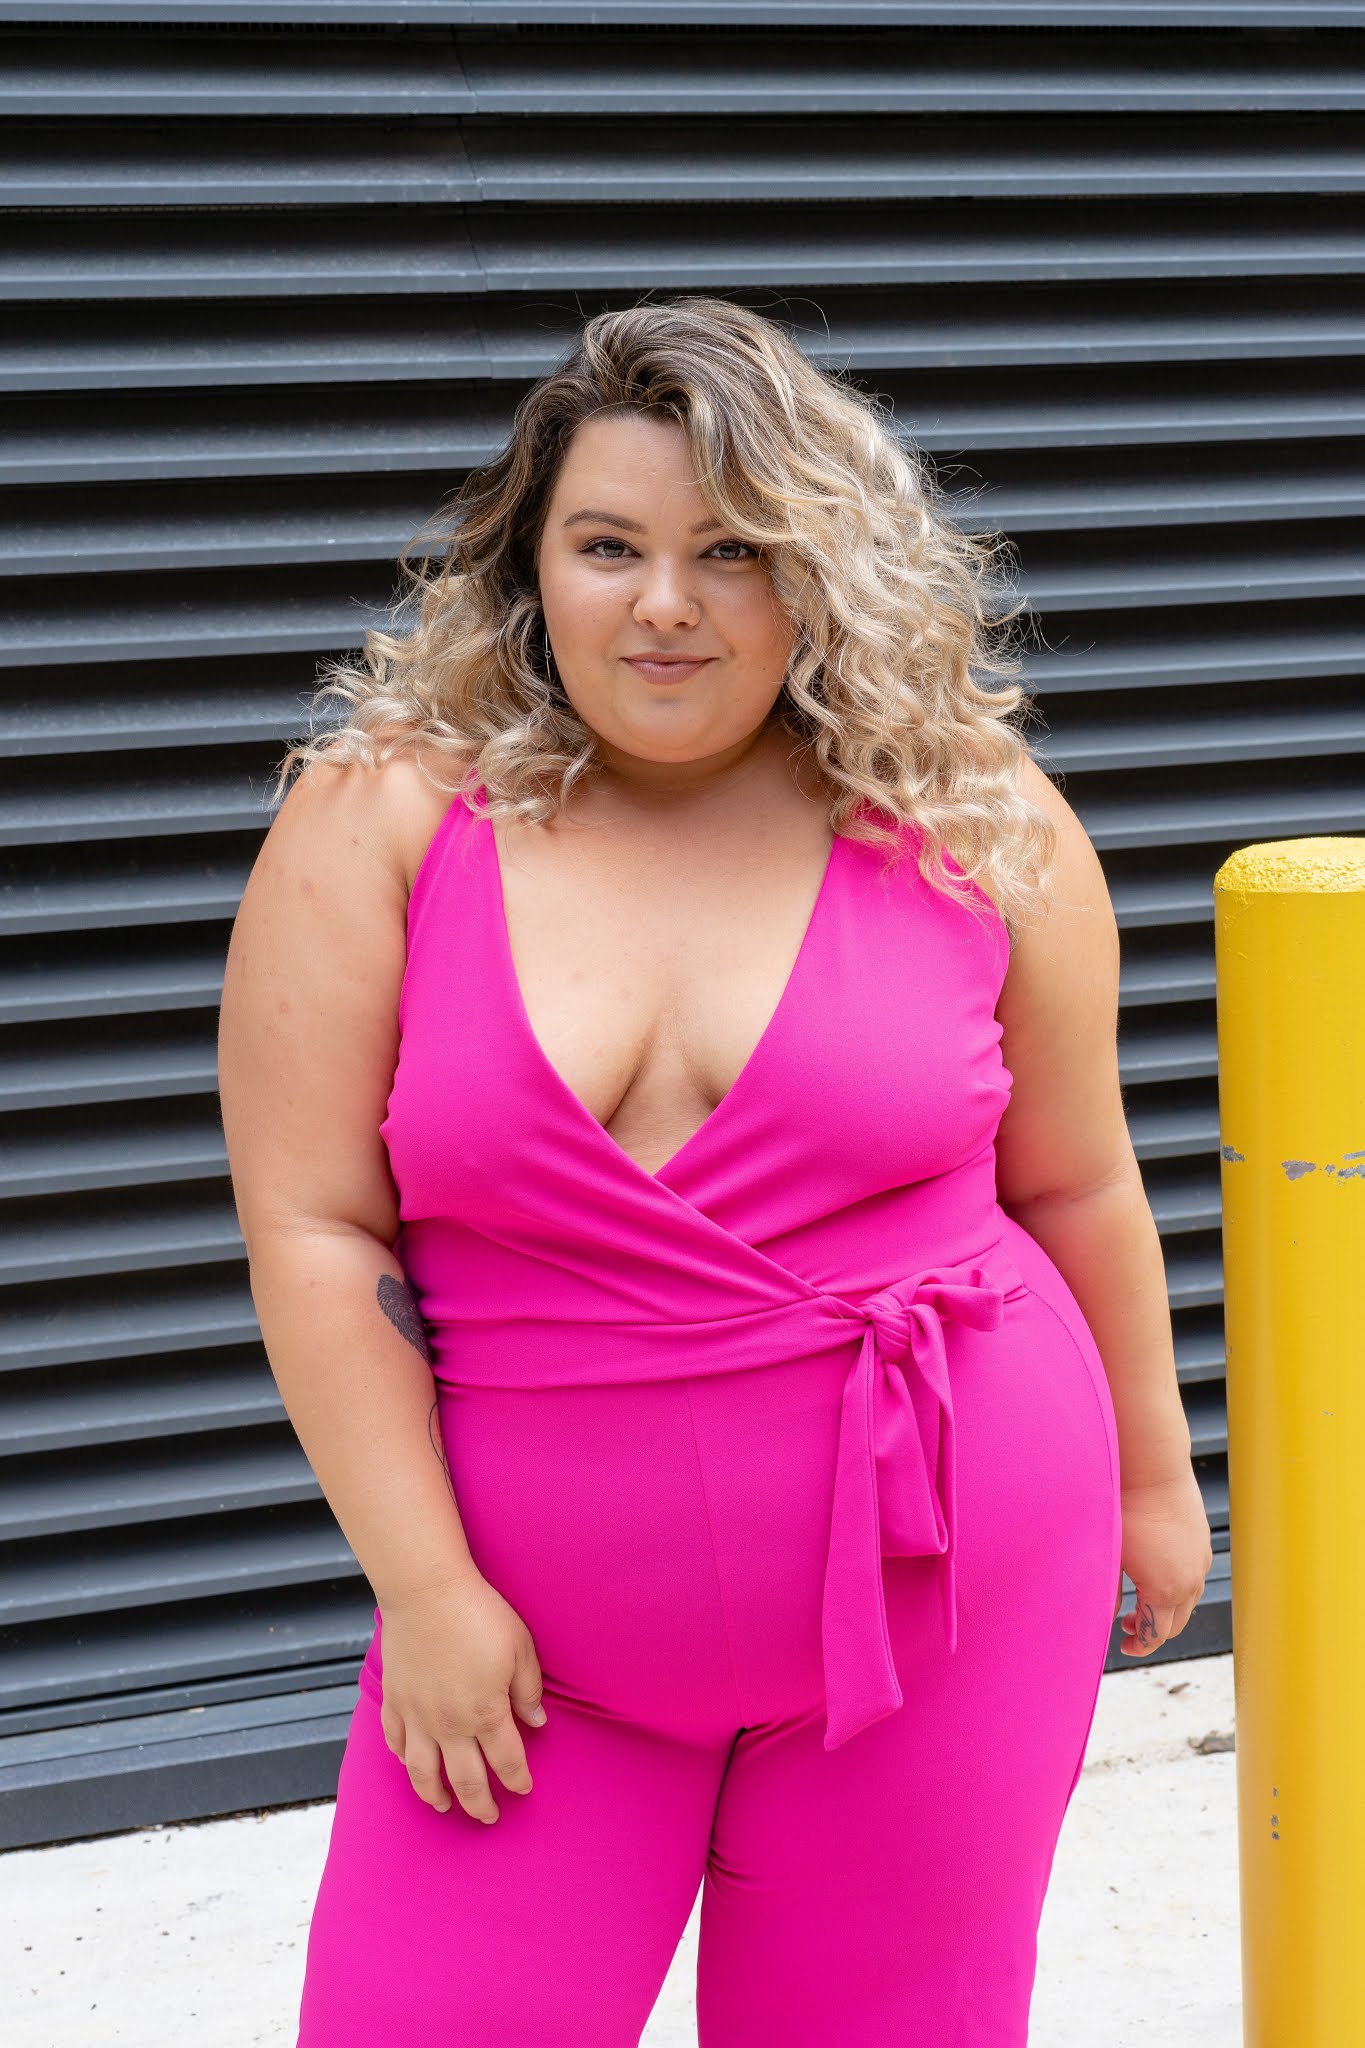 Chicago Plus Size Petite Fashion Blogger reviews a Fashion Nova Curve Jumpsuit and talks about embracing her lower tummy and curves.